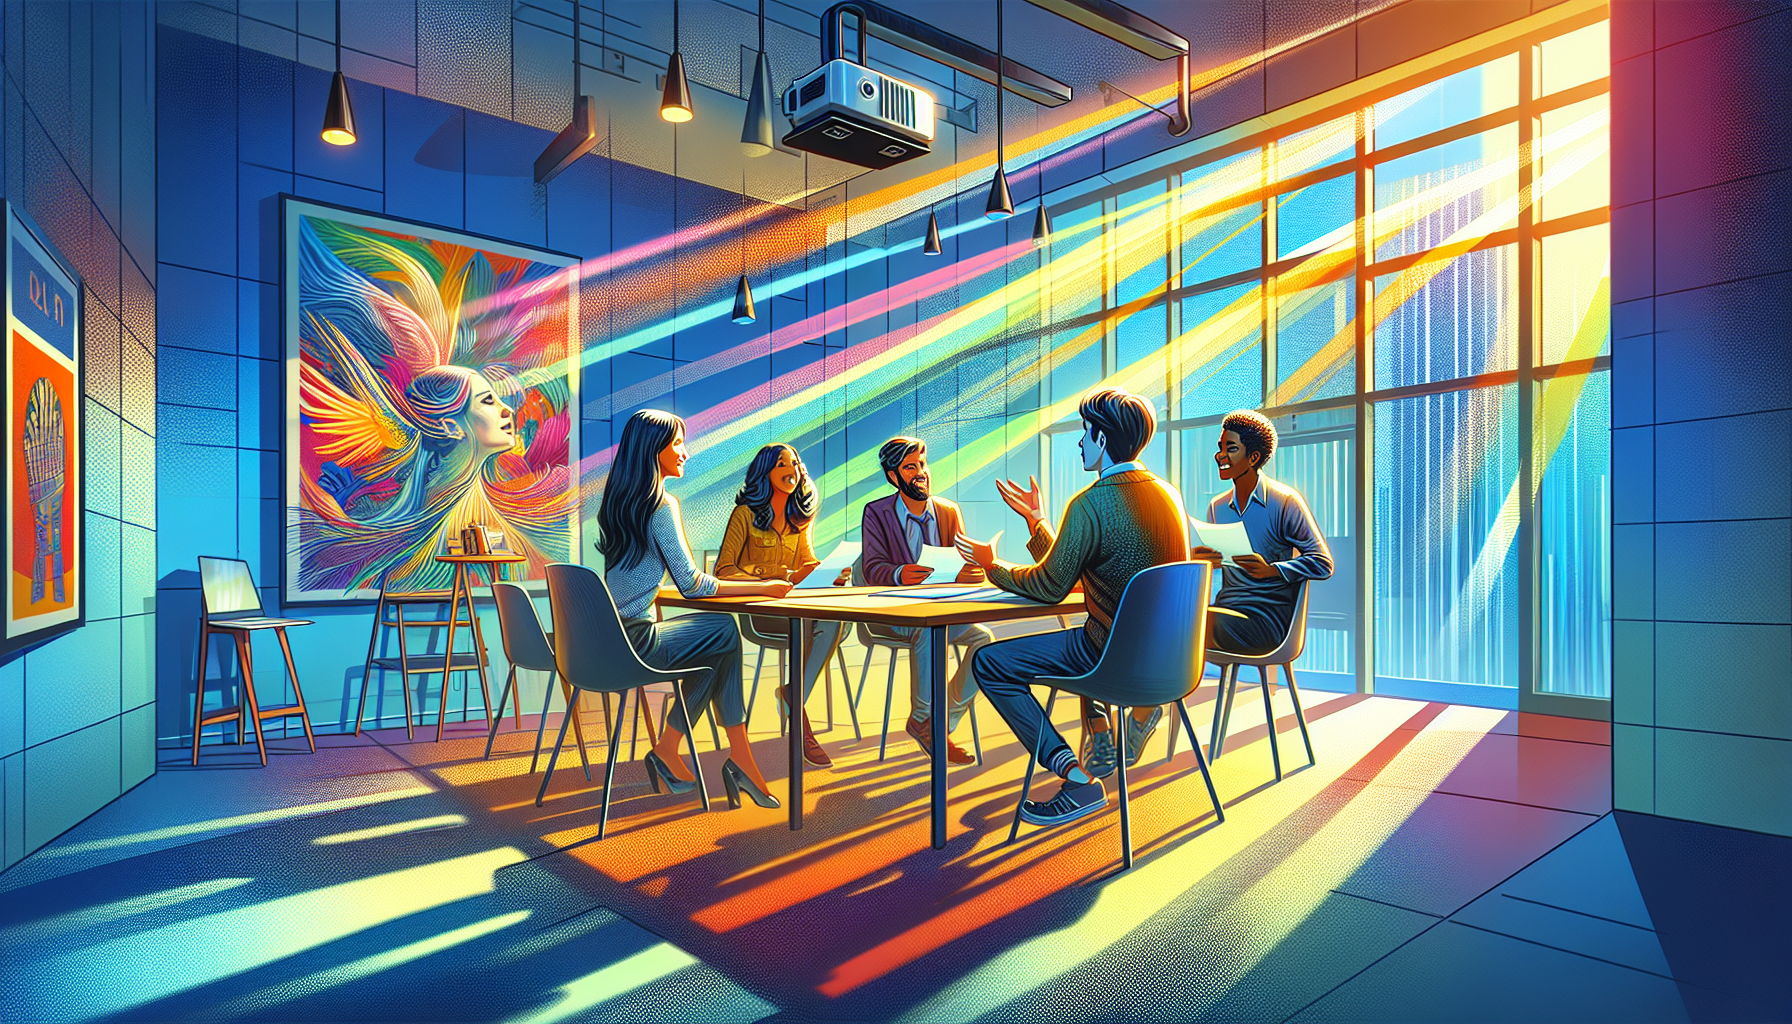 An artistic representation of a diverse group of people sitting in a modern, sunlit classroom with large windows, holding scripts and engaged in a lively discussion, with movie posters on the walls an